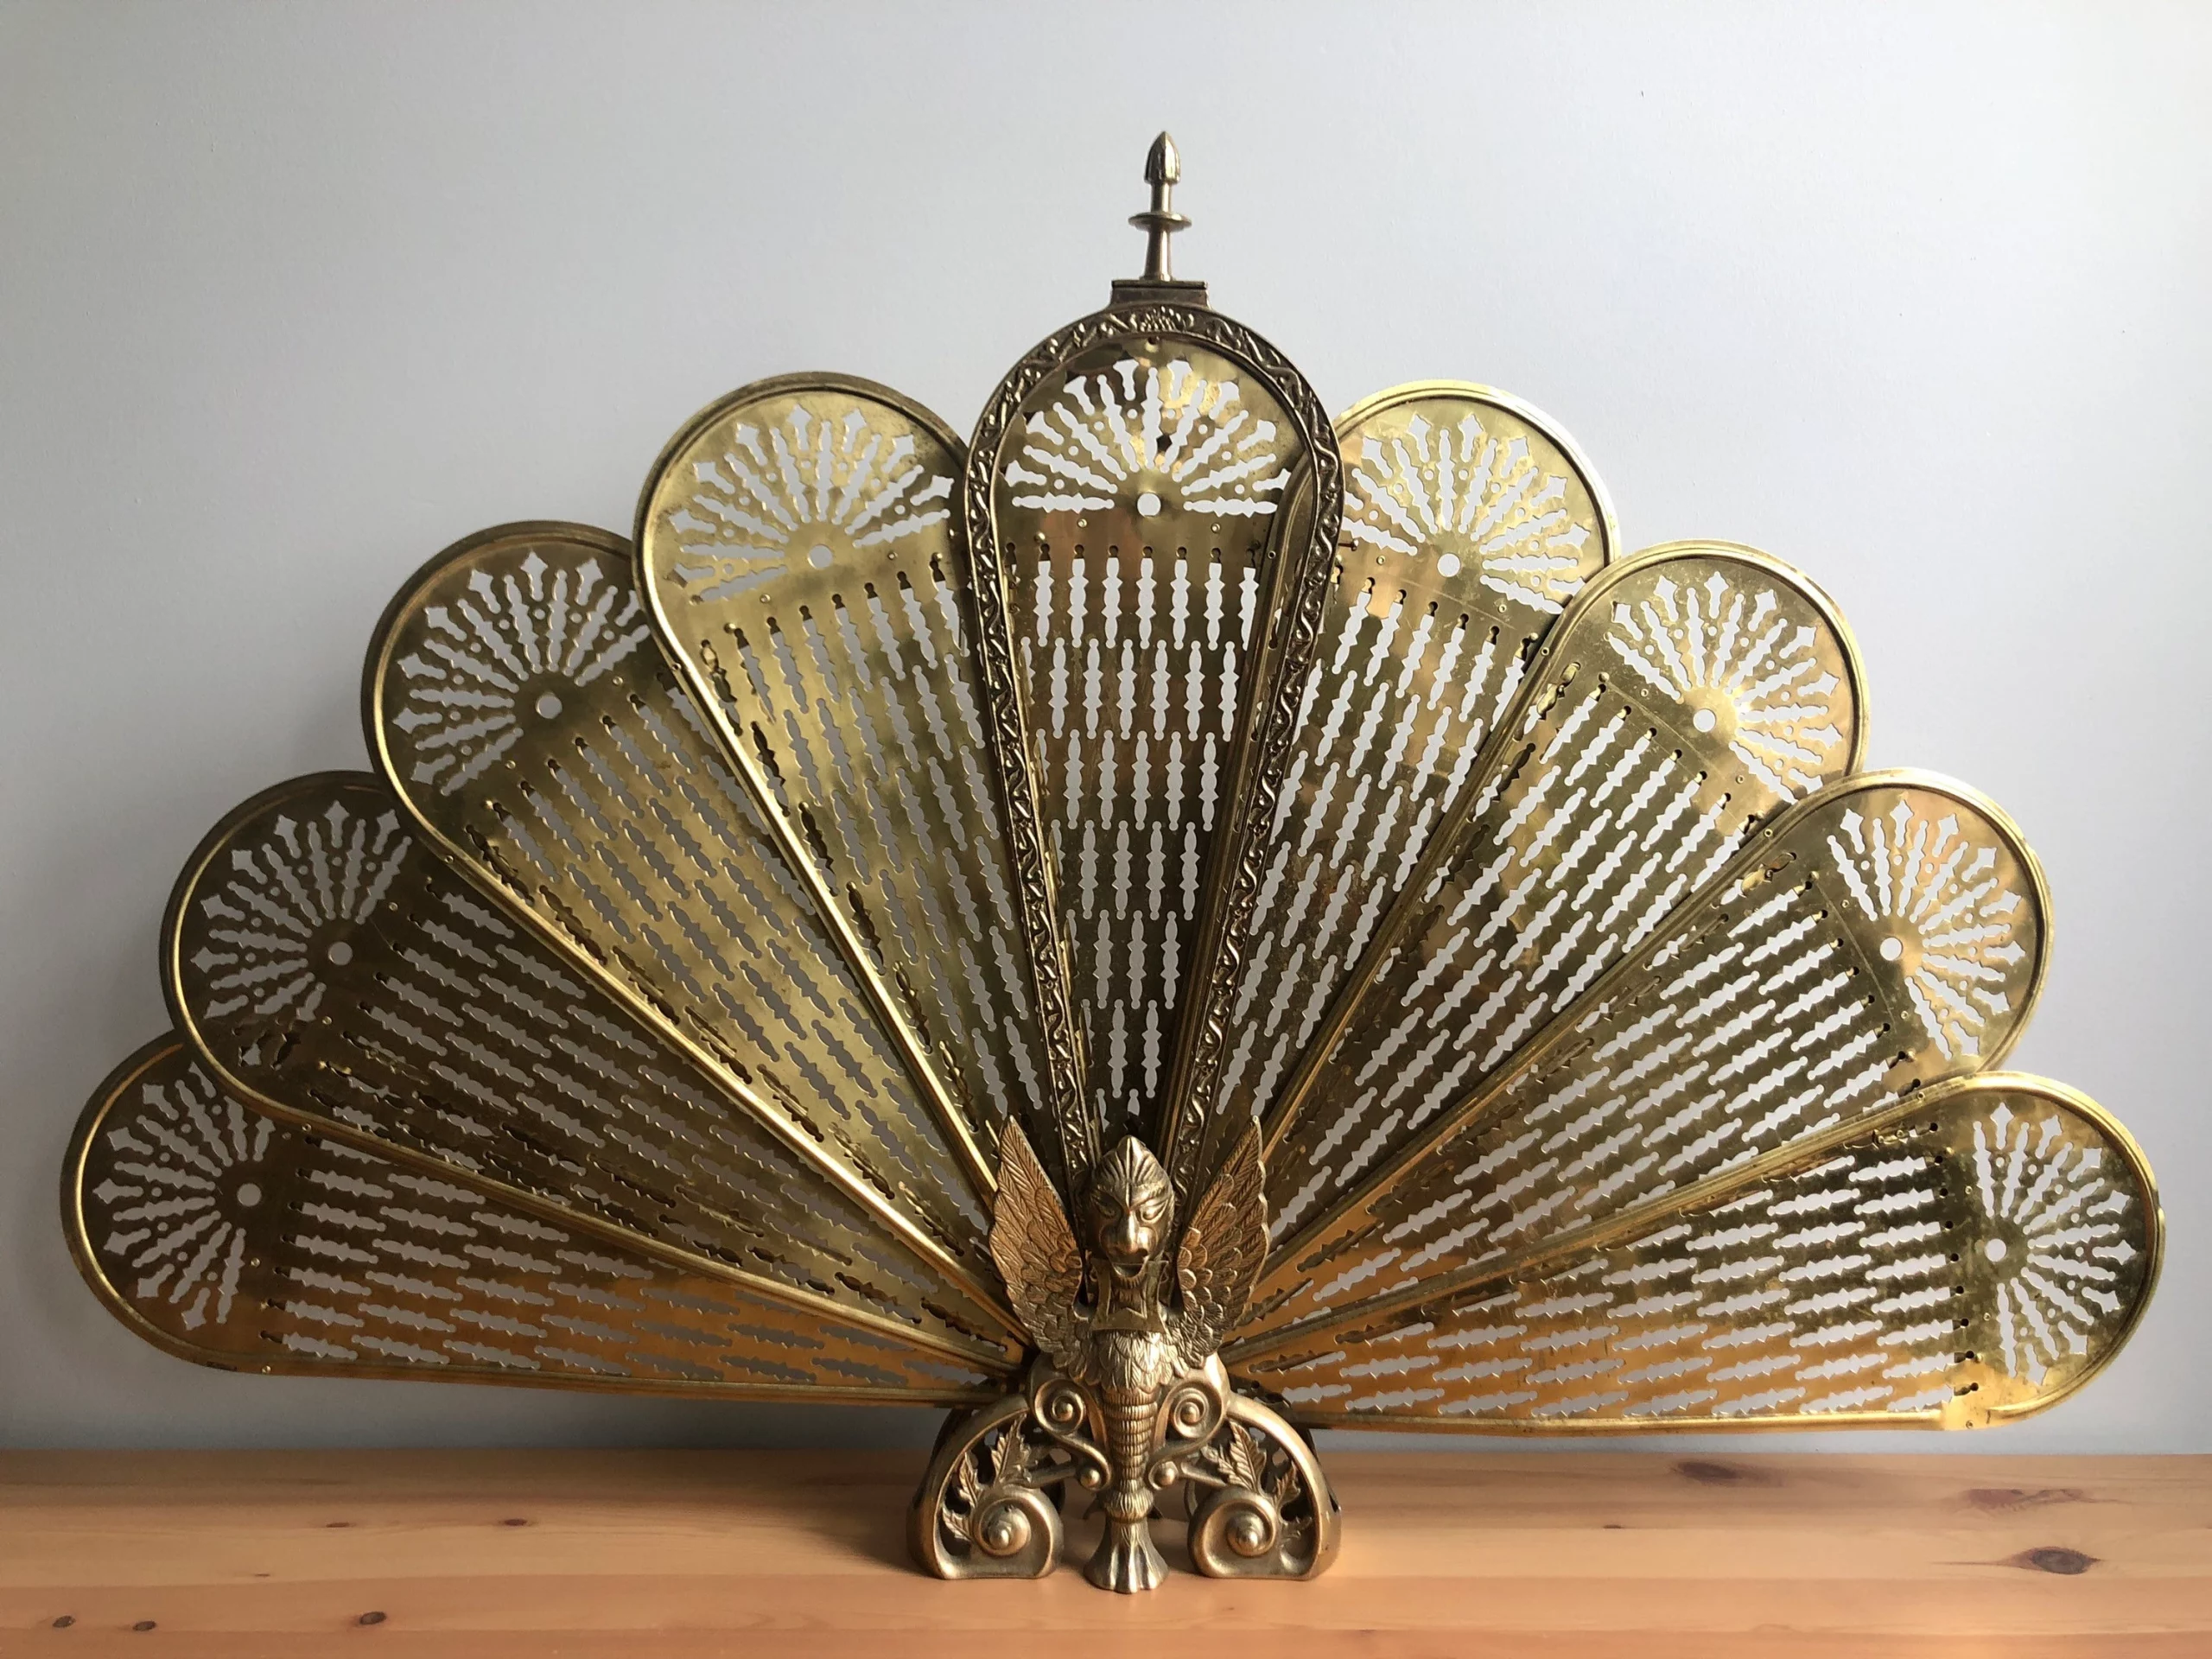 Scottsdale Vintage Finds – The Best Place To Find Vintage Fireplace Tools And Antique Peacock Fireplace Screens